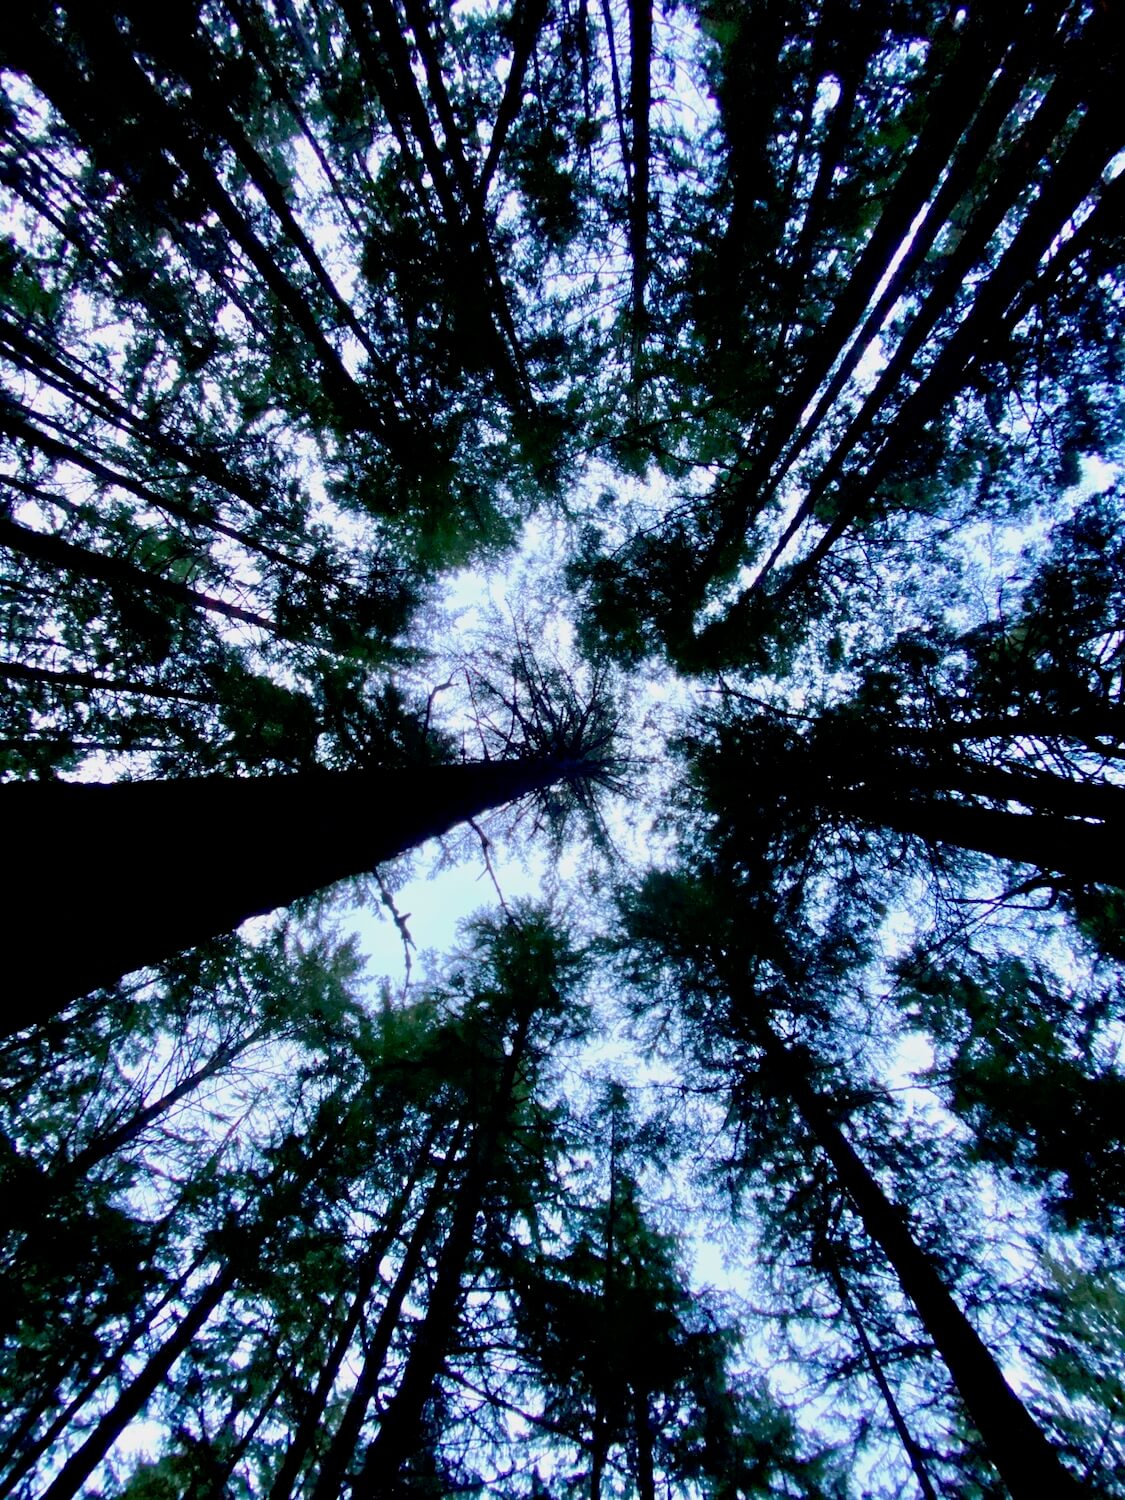 View looking up from deep within the forest at the fir trees high above joining together, covering up the blue sky above.  Fir trees are everywhere when you explore the Olympic Peninsula.